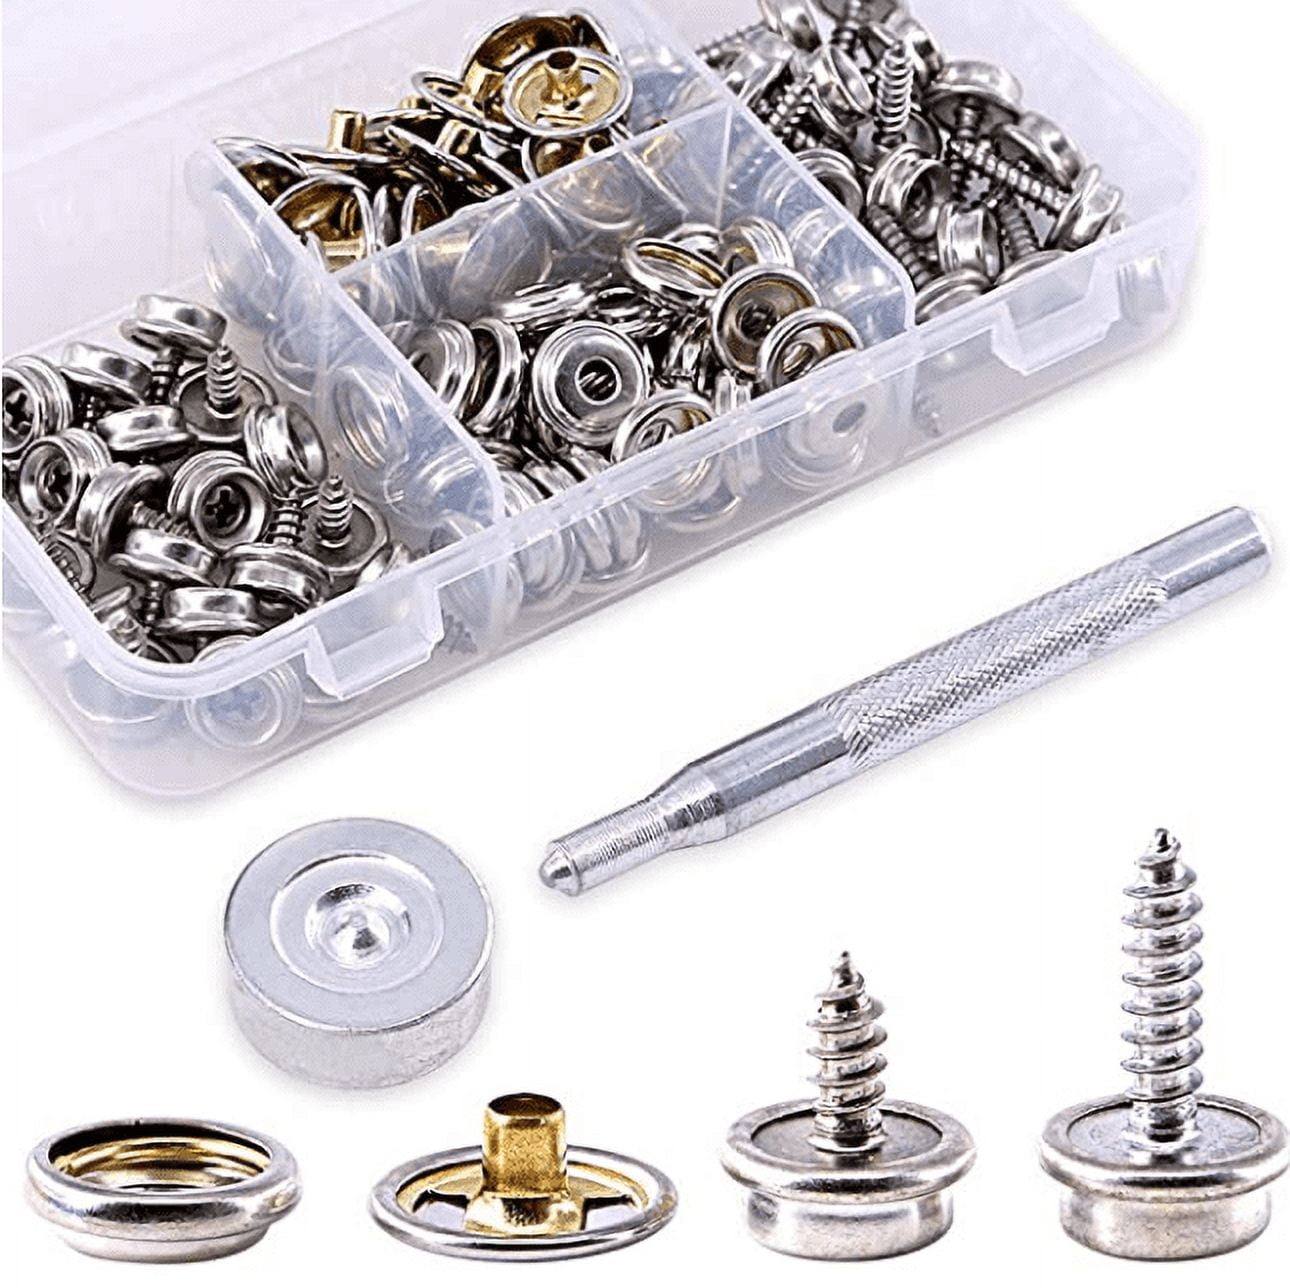 HARFINGTON 75PCS Canvas Snap Kit 3/5 Marine Grade Stainless Steel Snaps  Screw Snap Button Fasteners Kit Snaps for Boat Cover Carpet Repairing,  Silver